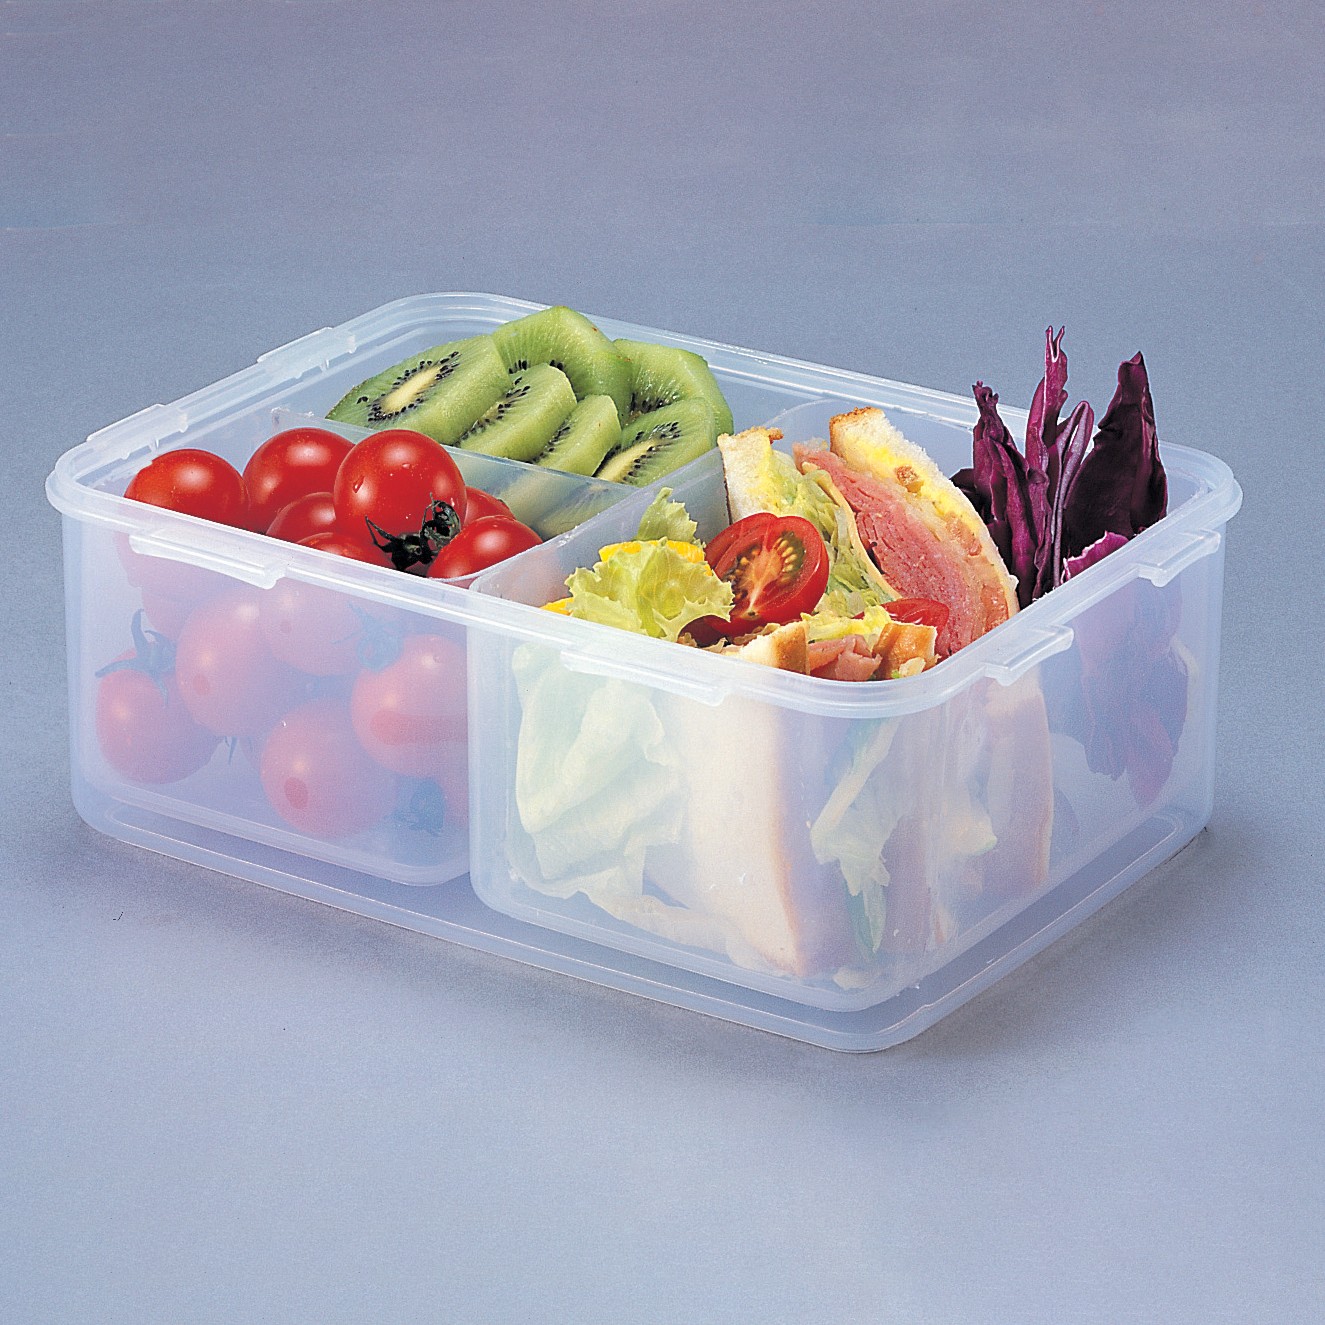 Round Stainless Steel Airtight Take-Out Container with Dividers